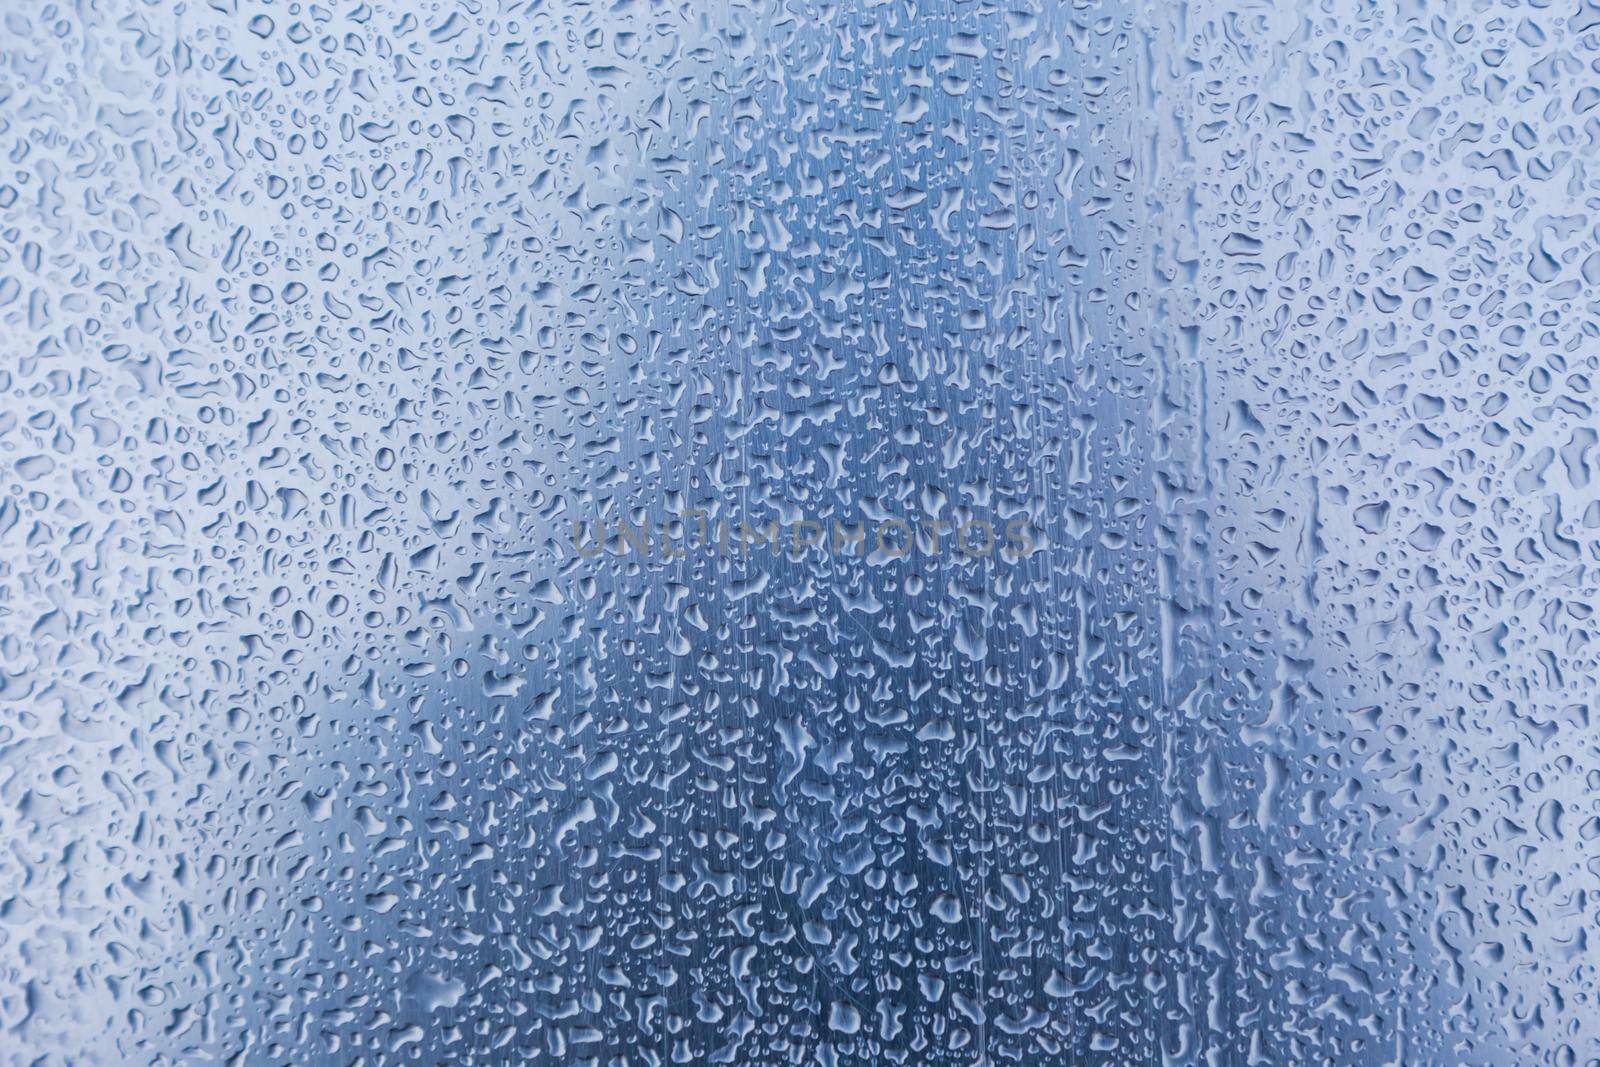 Water droplets or Rain Drops On Glass Textured Blue Background. by lunarts